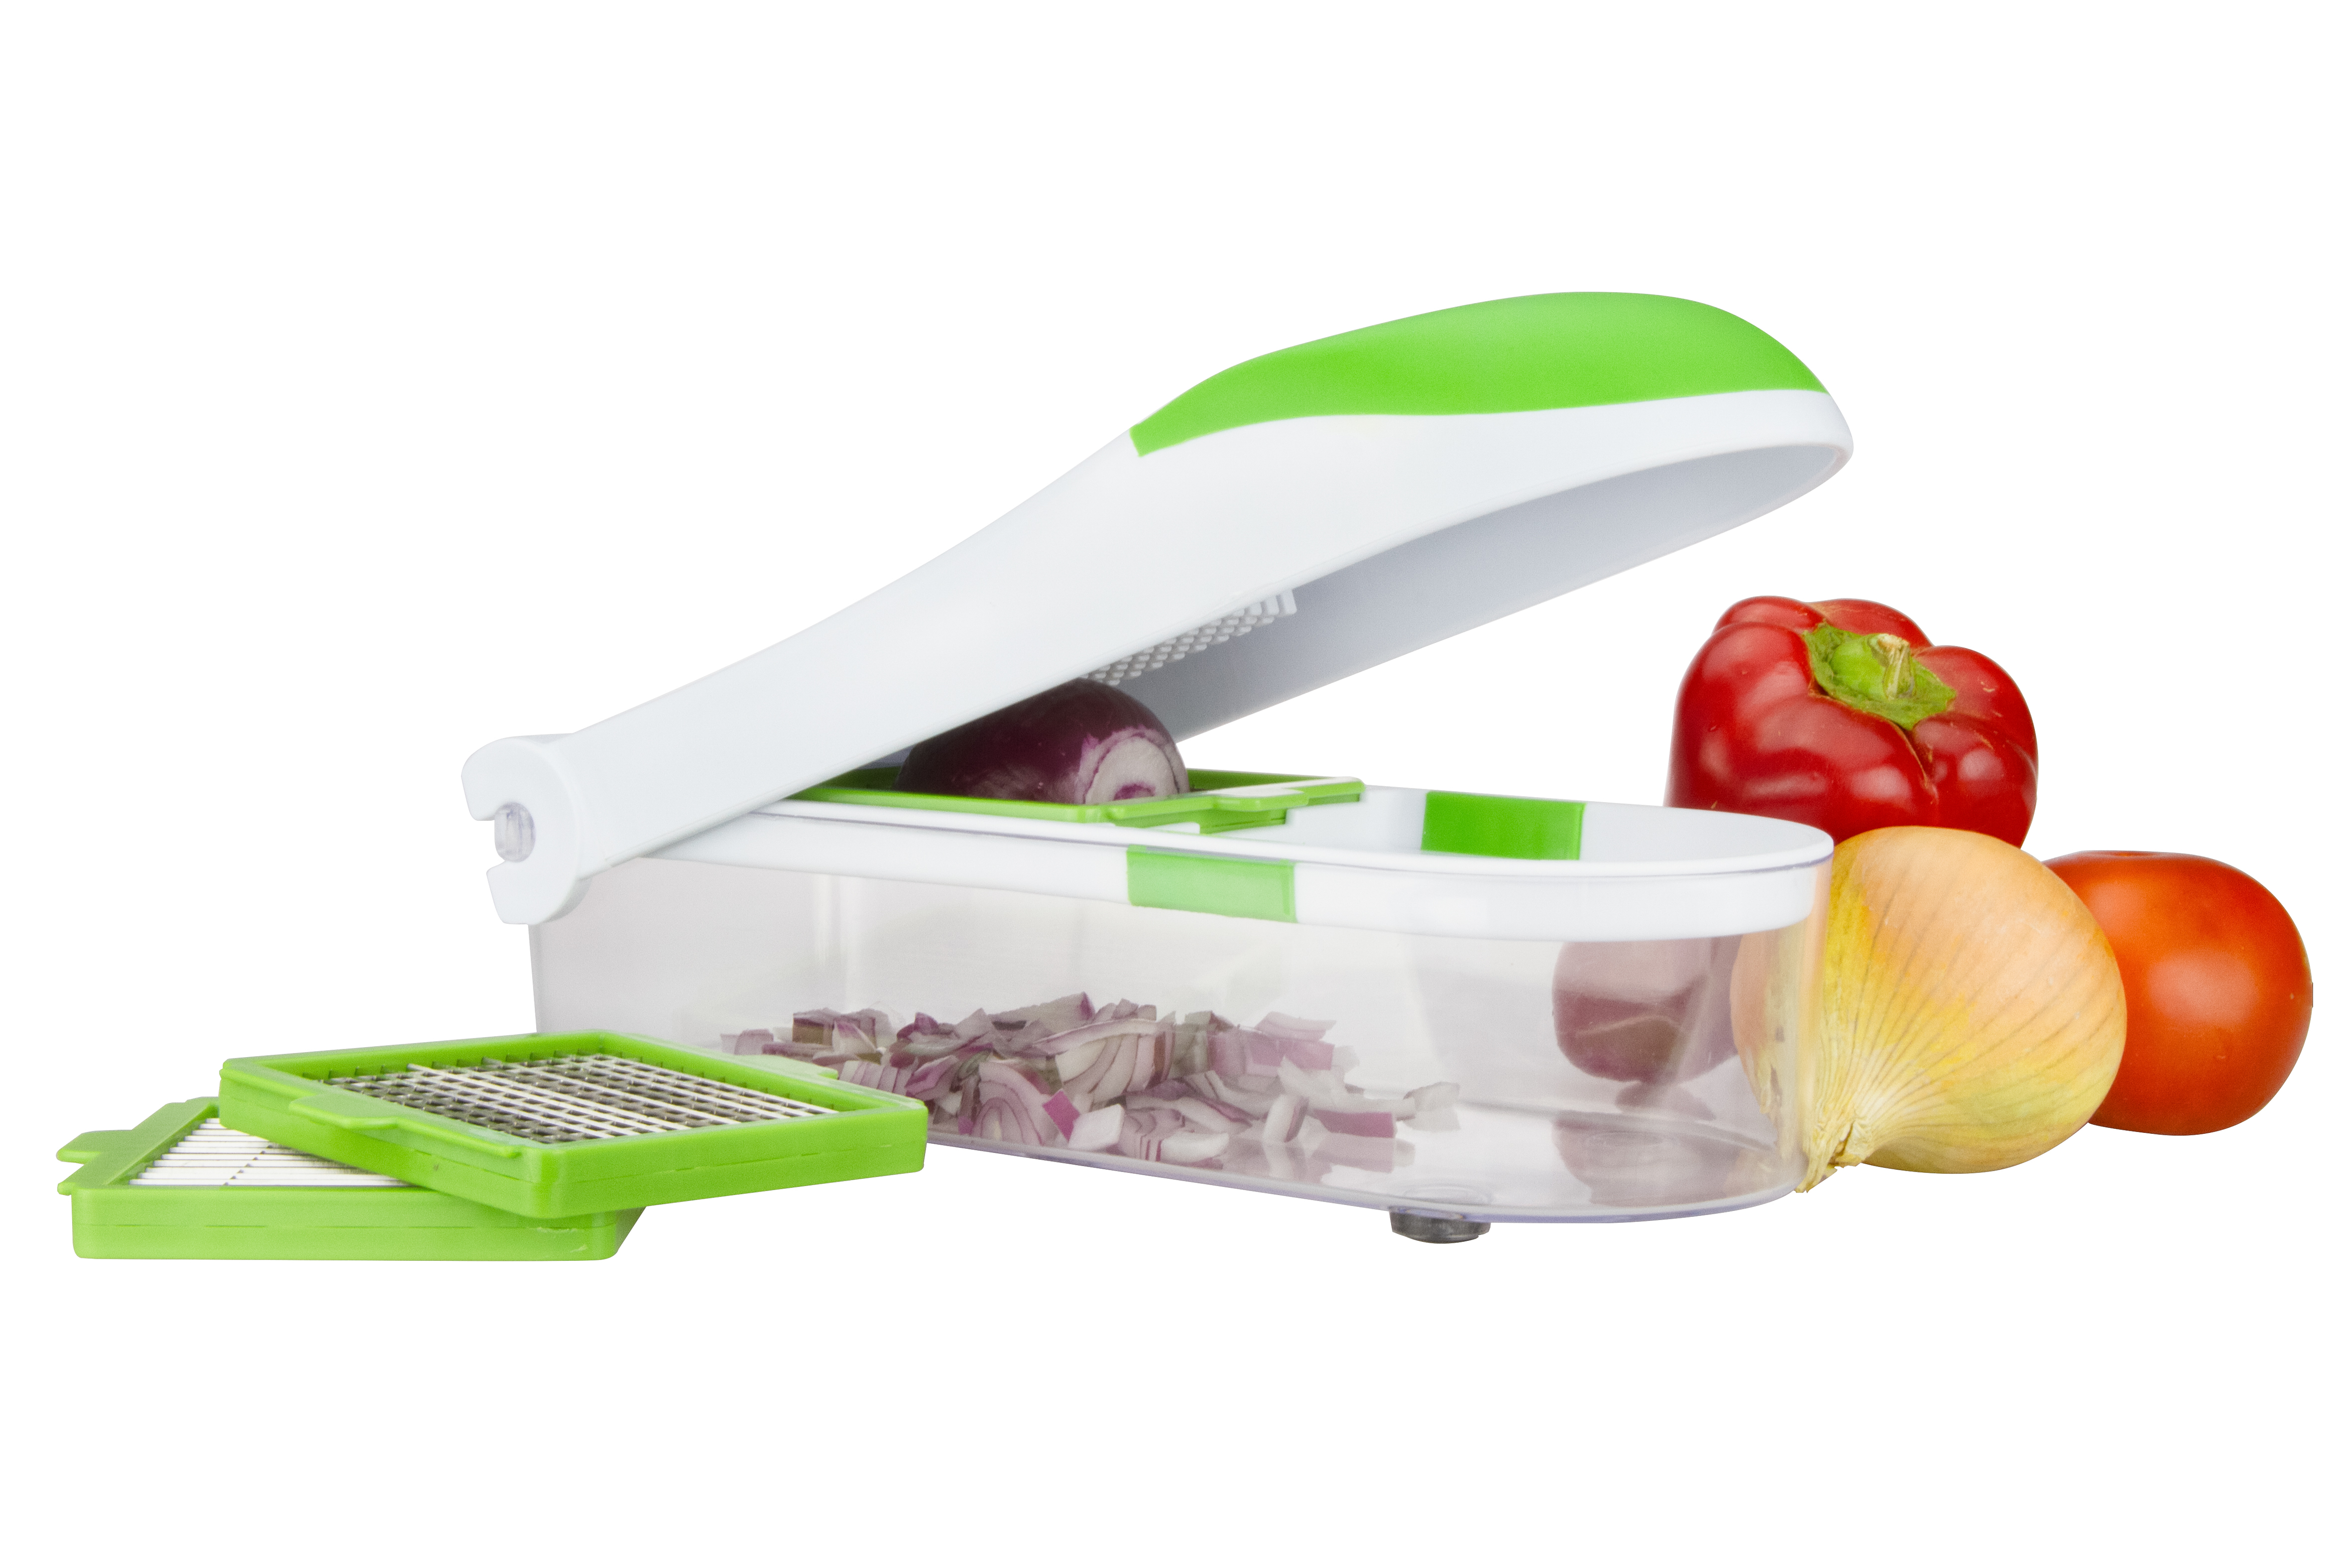 Brieftons “QuickPush” Food Chopper — Tools and Toys